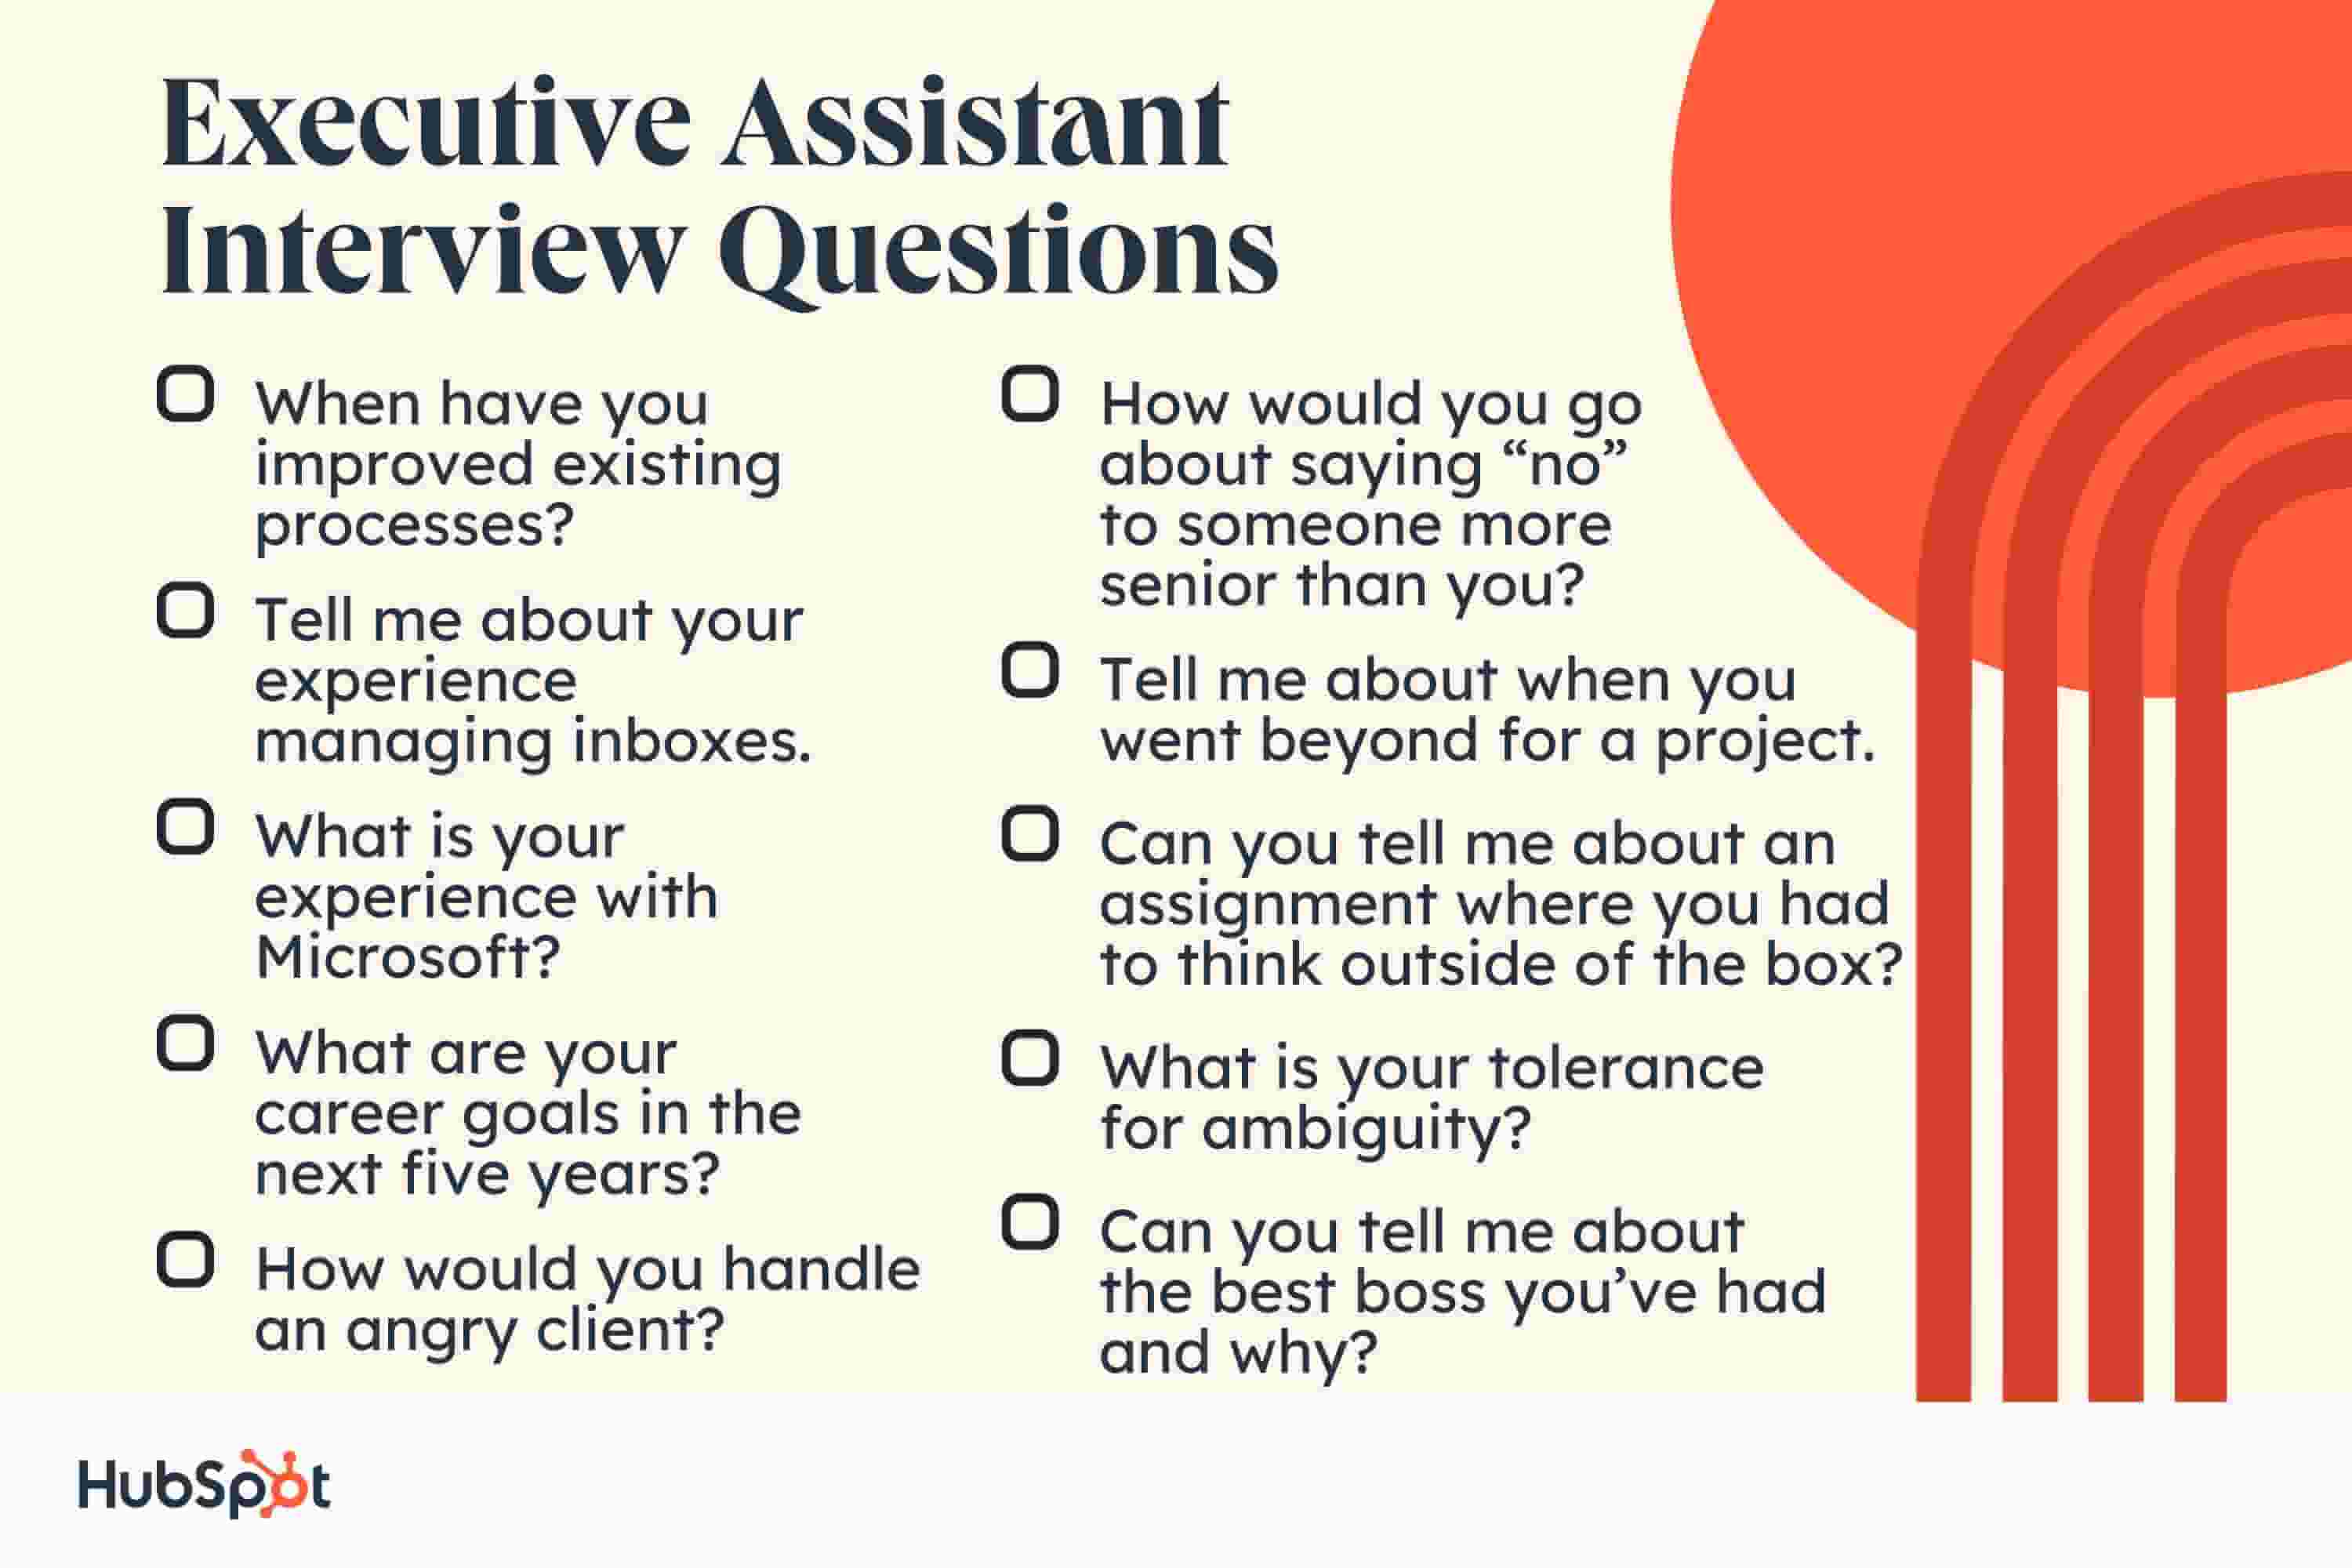 Executive Assistant Interview Questions When have you improved existing processes? Tell me about your experience managing inboxes. What is your experience with Microsoft? What are your career goals in the next five years? How would you go about saying “no” to someone more senior than you? Tell me about when you went beyond for a project. Can you tell me about an assignment where you had to think outside of the box? What is your tolerance for ambiguity? Can you tell me about the best boss you’ve had and why? How would you handle an angry client?